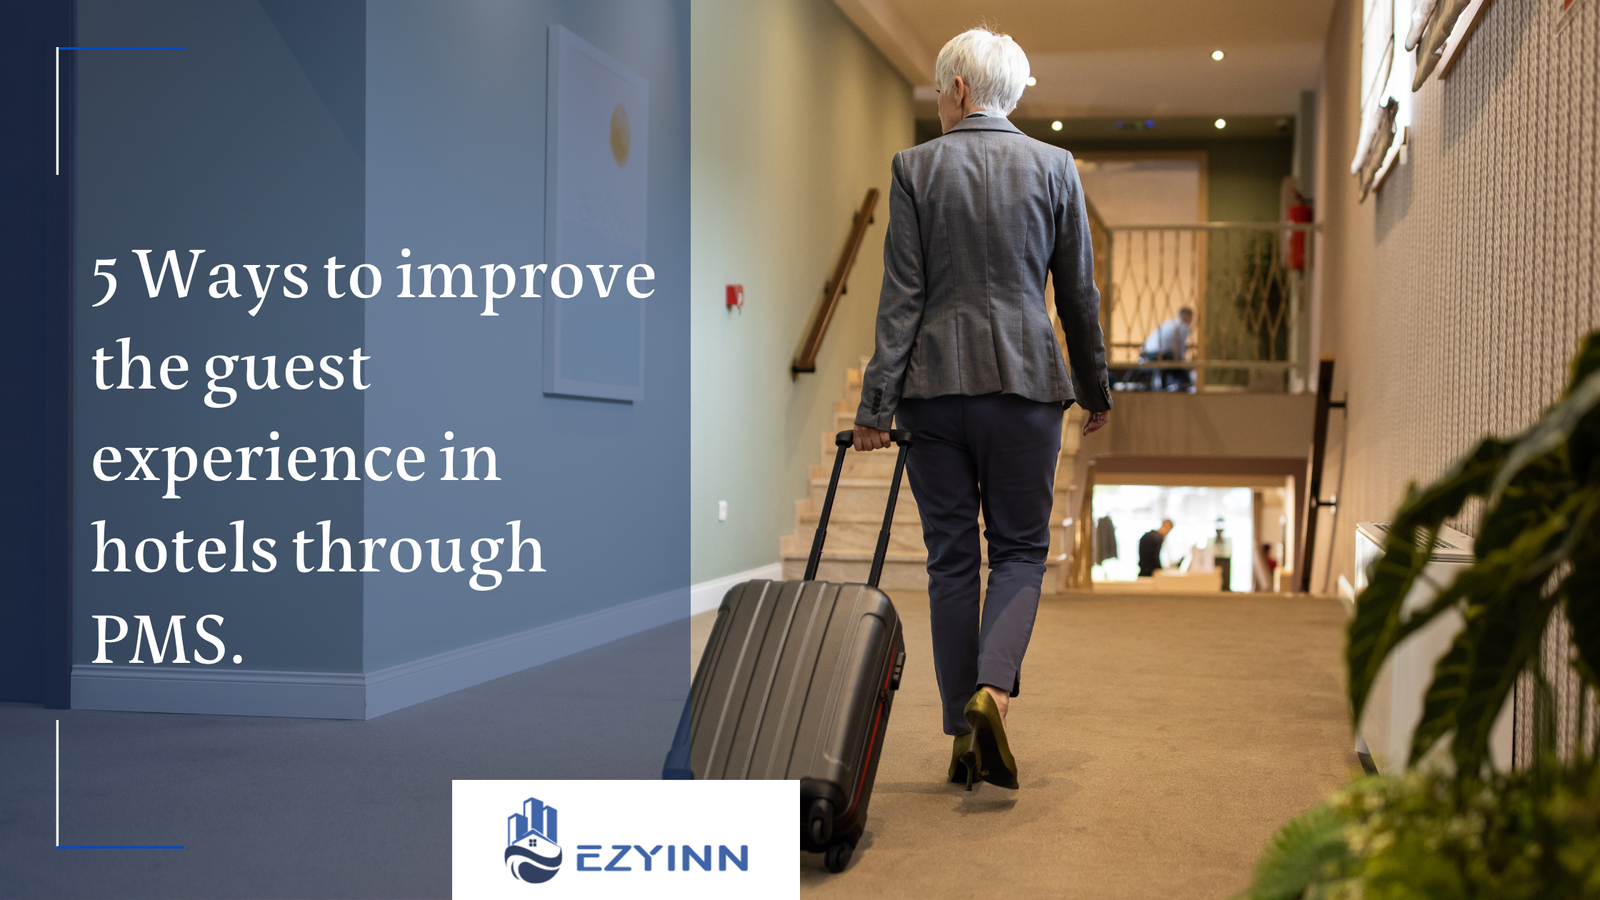 5 Ways to improve the guest experience in hotels through PMS. | Ezyinn PMS